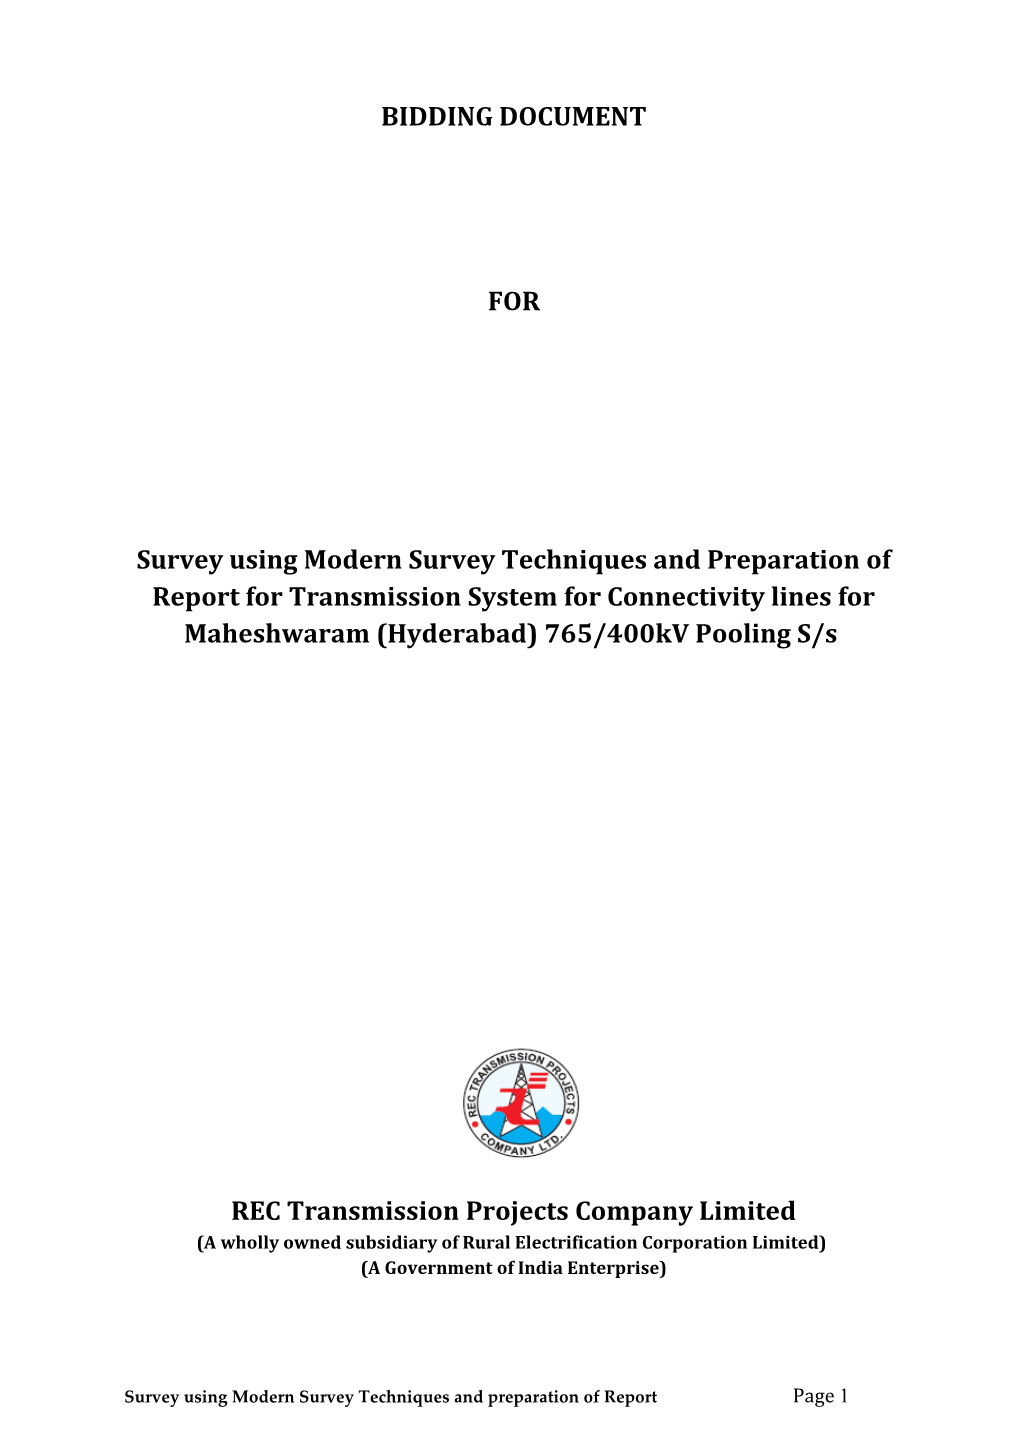 REC Transmission Projects Company Limited